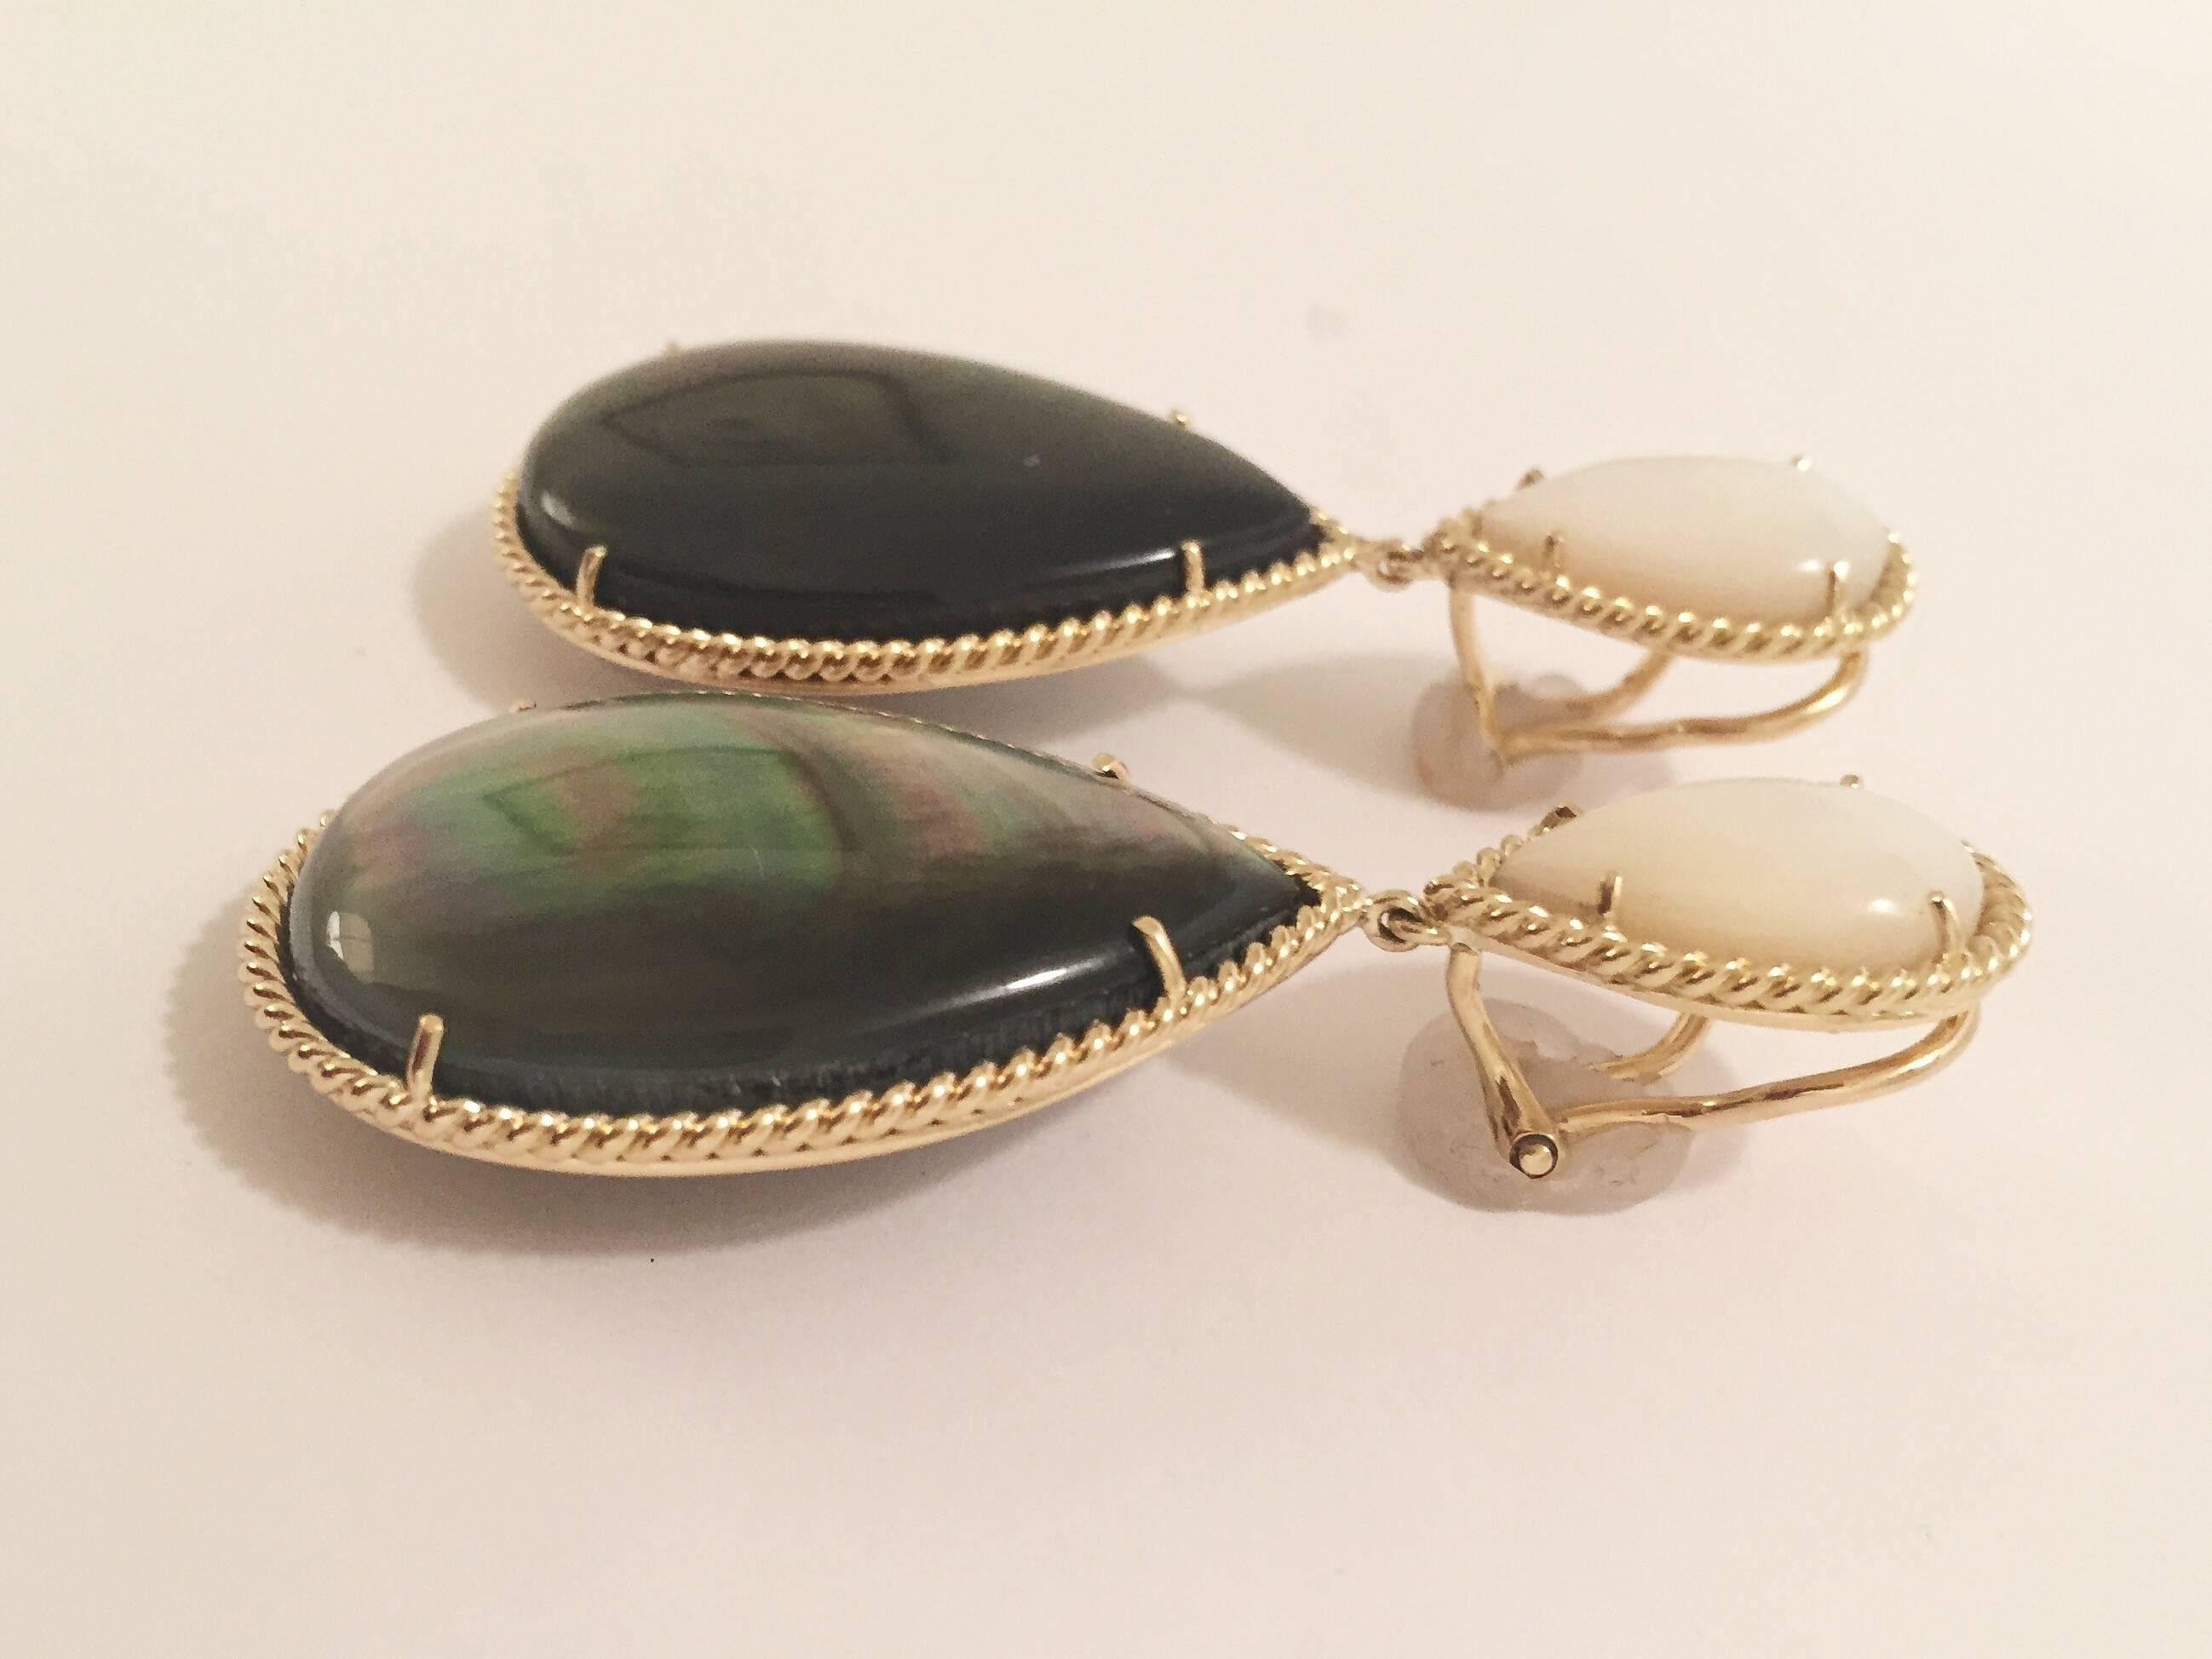 Elegant 18kt Yellow Gold Mother of Pearl and Abalone Drop Earring finished with Twisted Gold Border.  
The earrings measures ~ 2 1/2 inches long and ~ 1 1/8 at it widest point.  
The earring can be made for pieced or clip earrings.  
Please contact